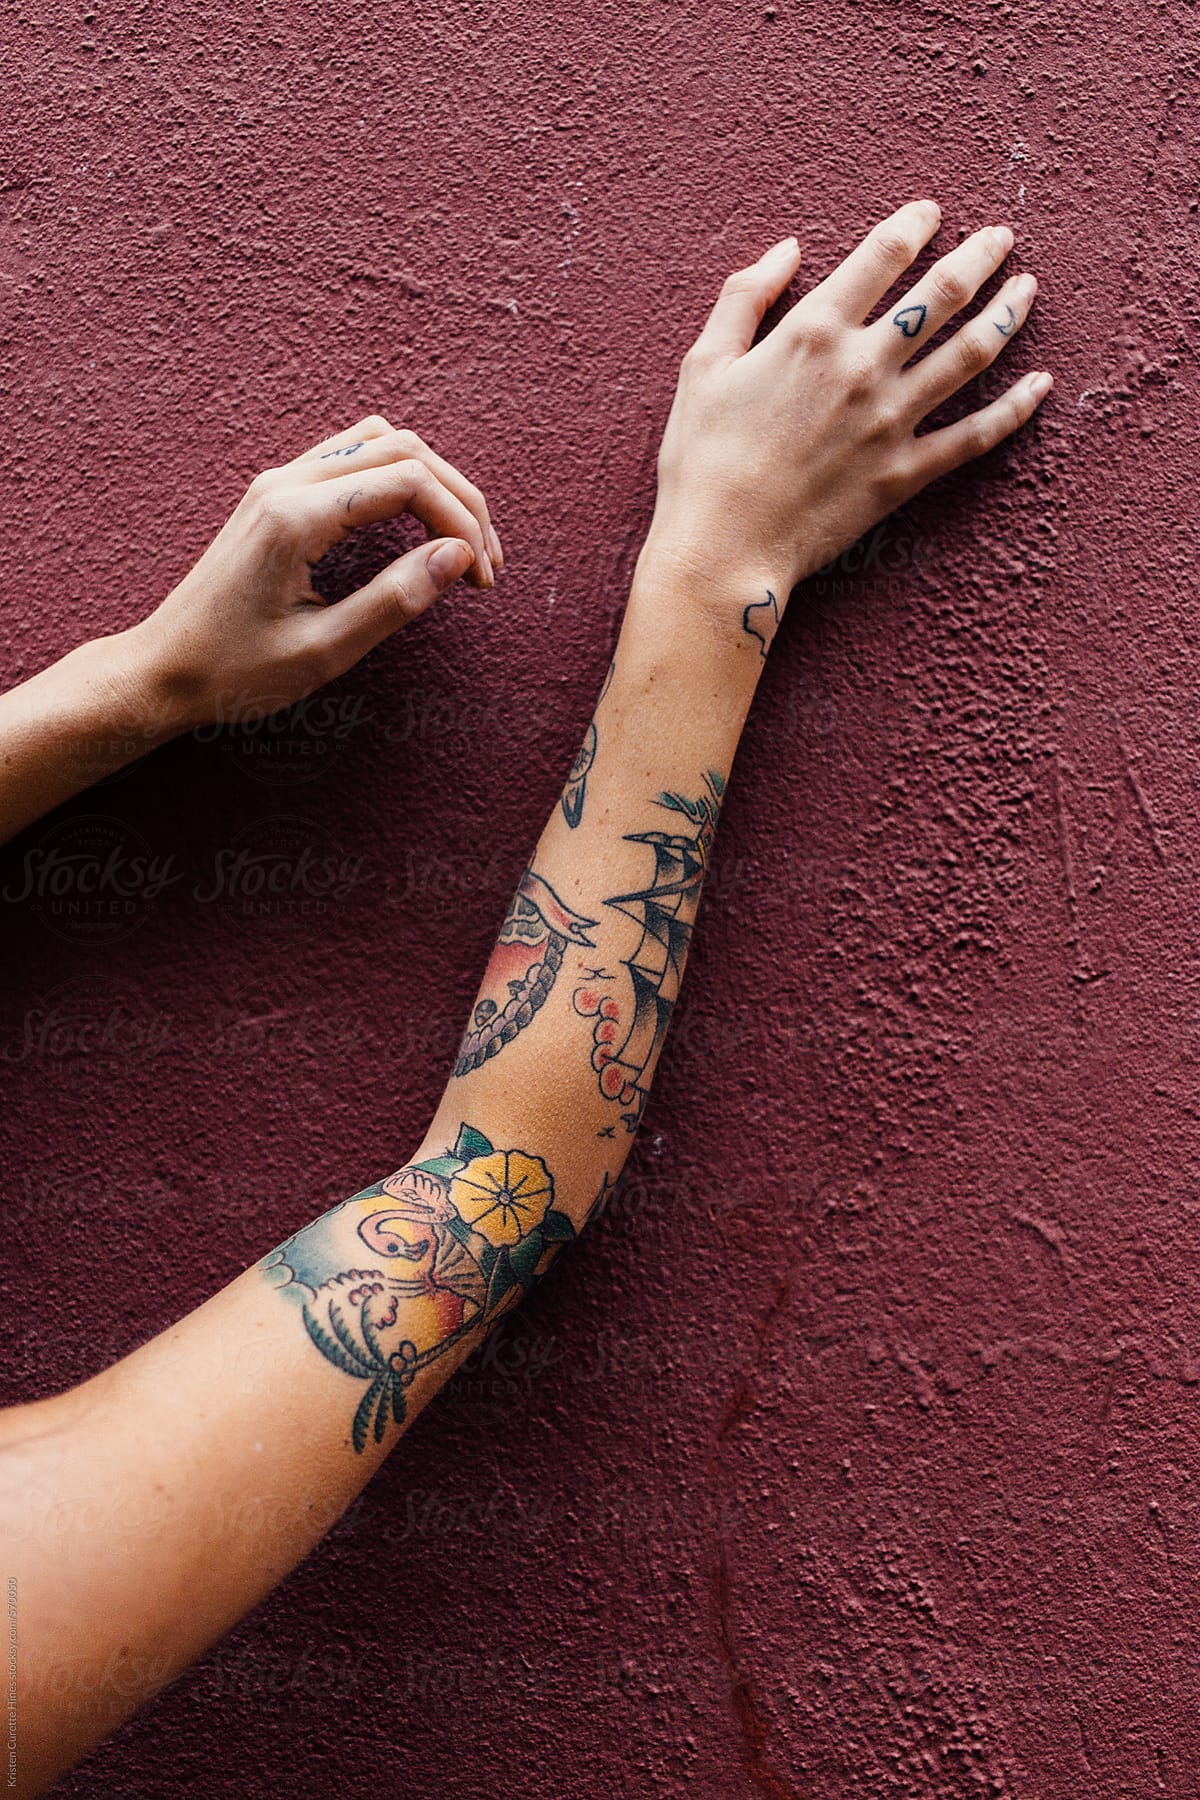 Tattooed arms reaching up a maroon concrete wall.